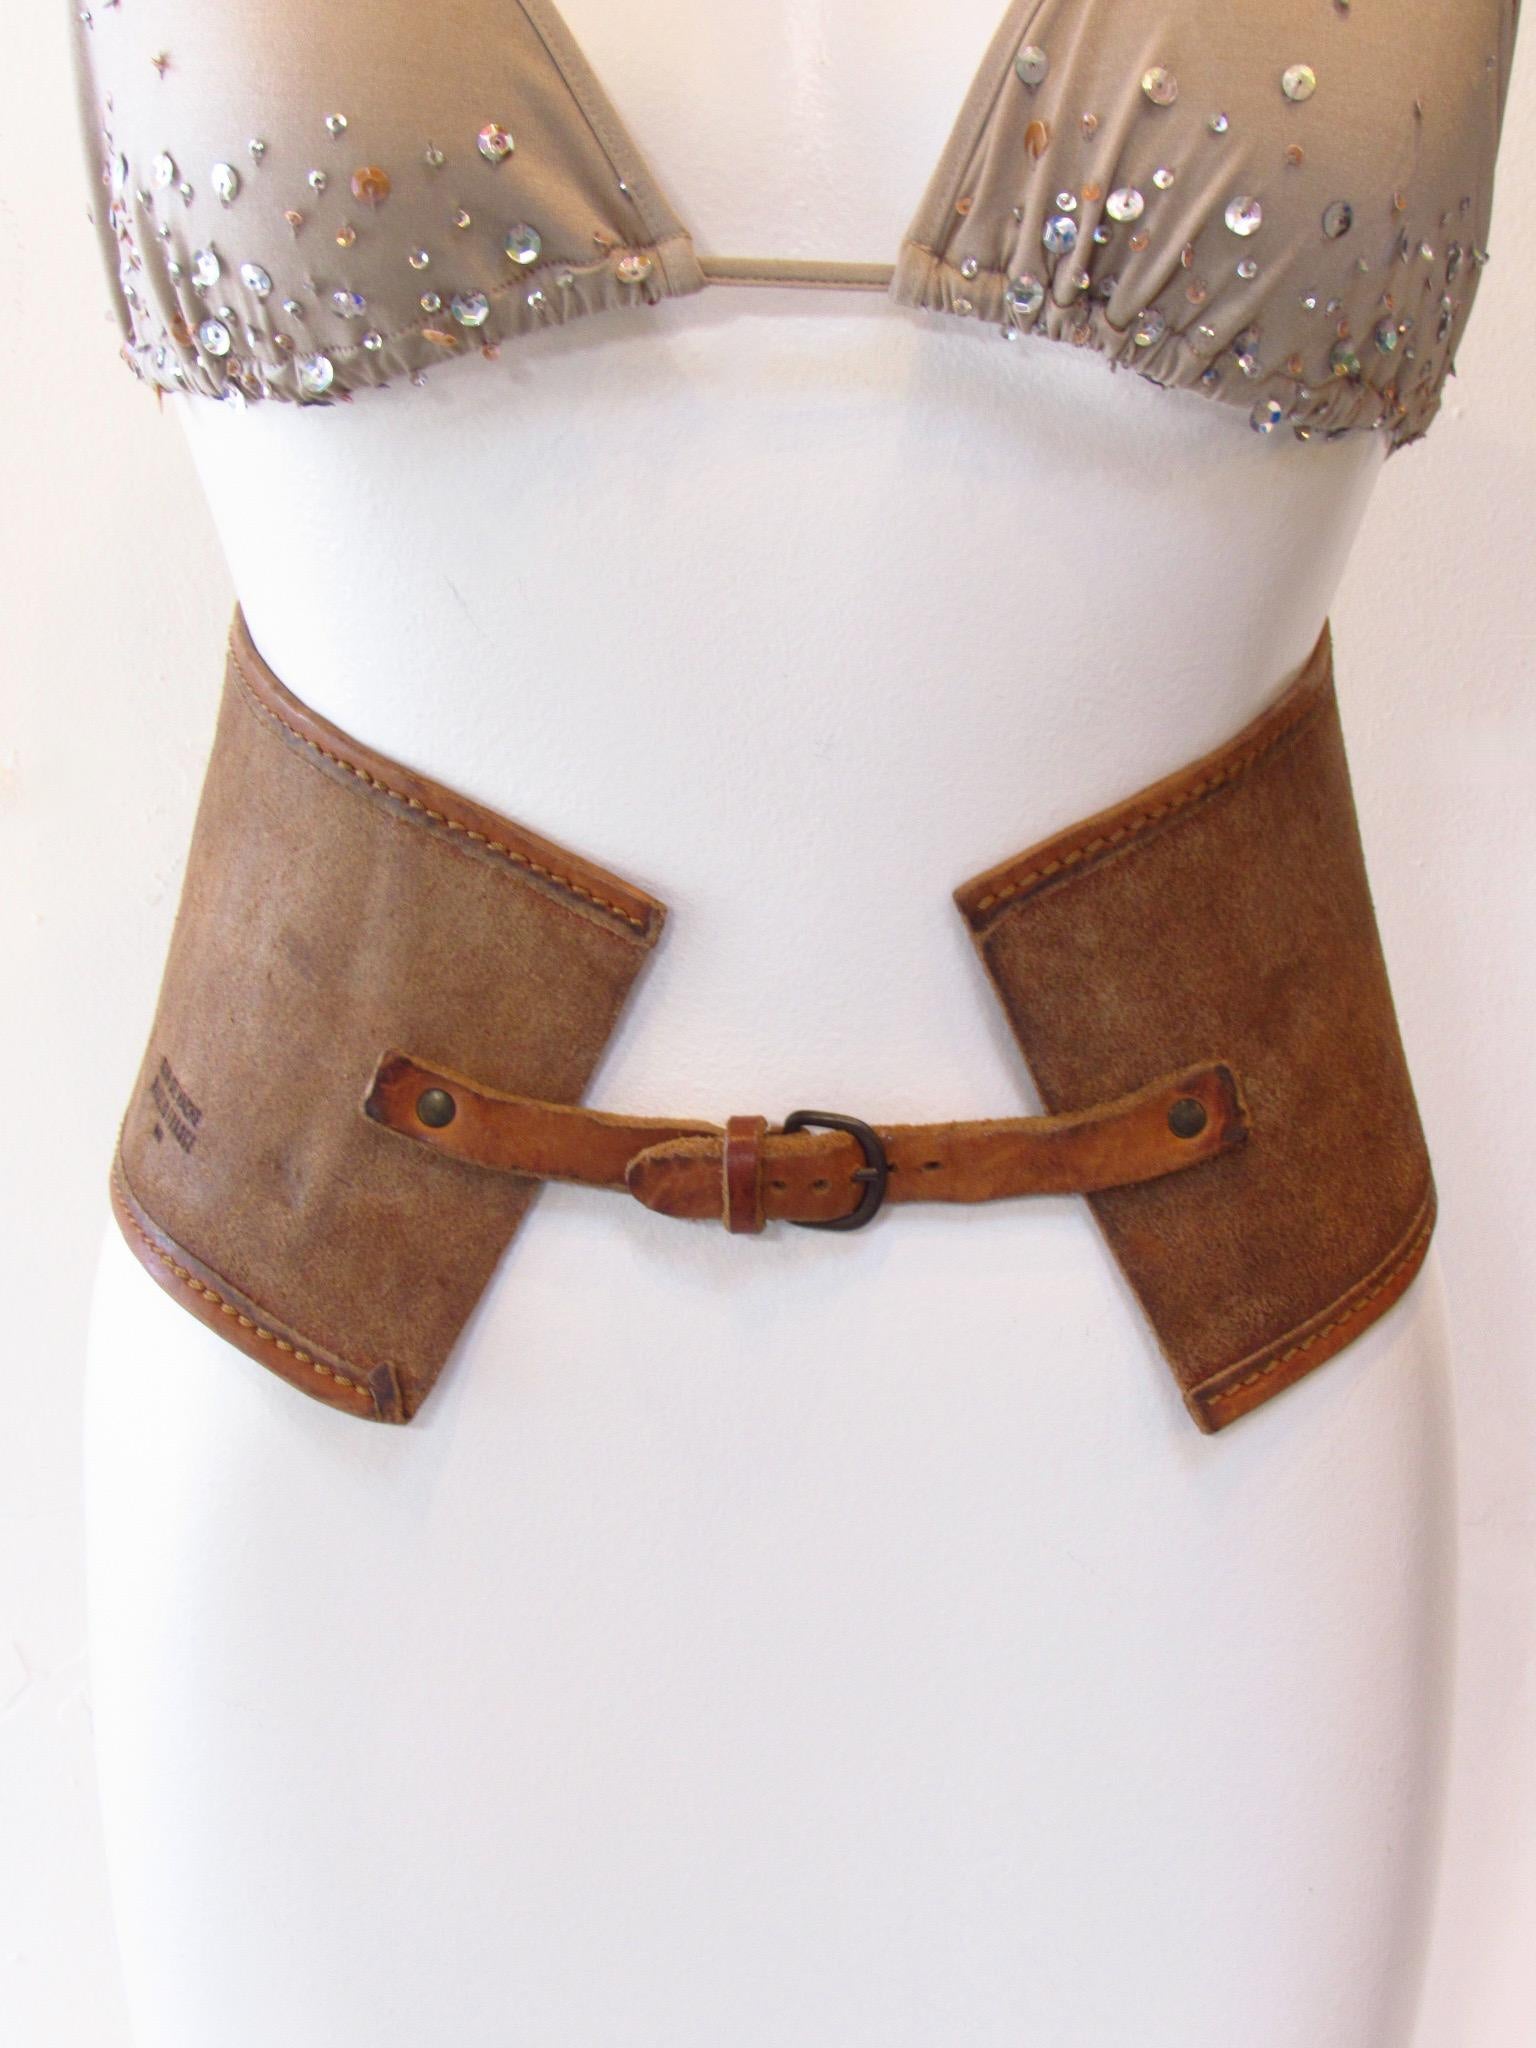 Vintage Maison Martin Margiela brown cowhide belt is rugged with sturdy straps in front that buckle closed. The wide band measures 24 inches. The complete width, including fasting straps, measures 30 inches from end to end. It is quite small.